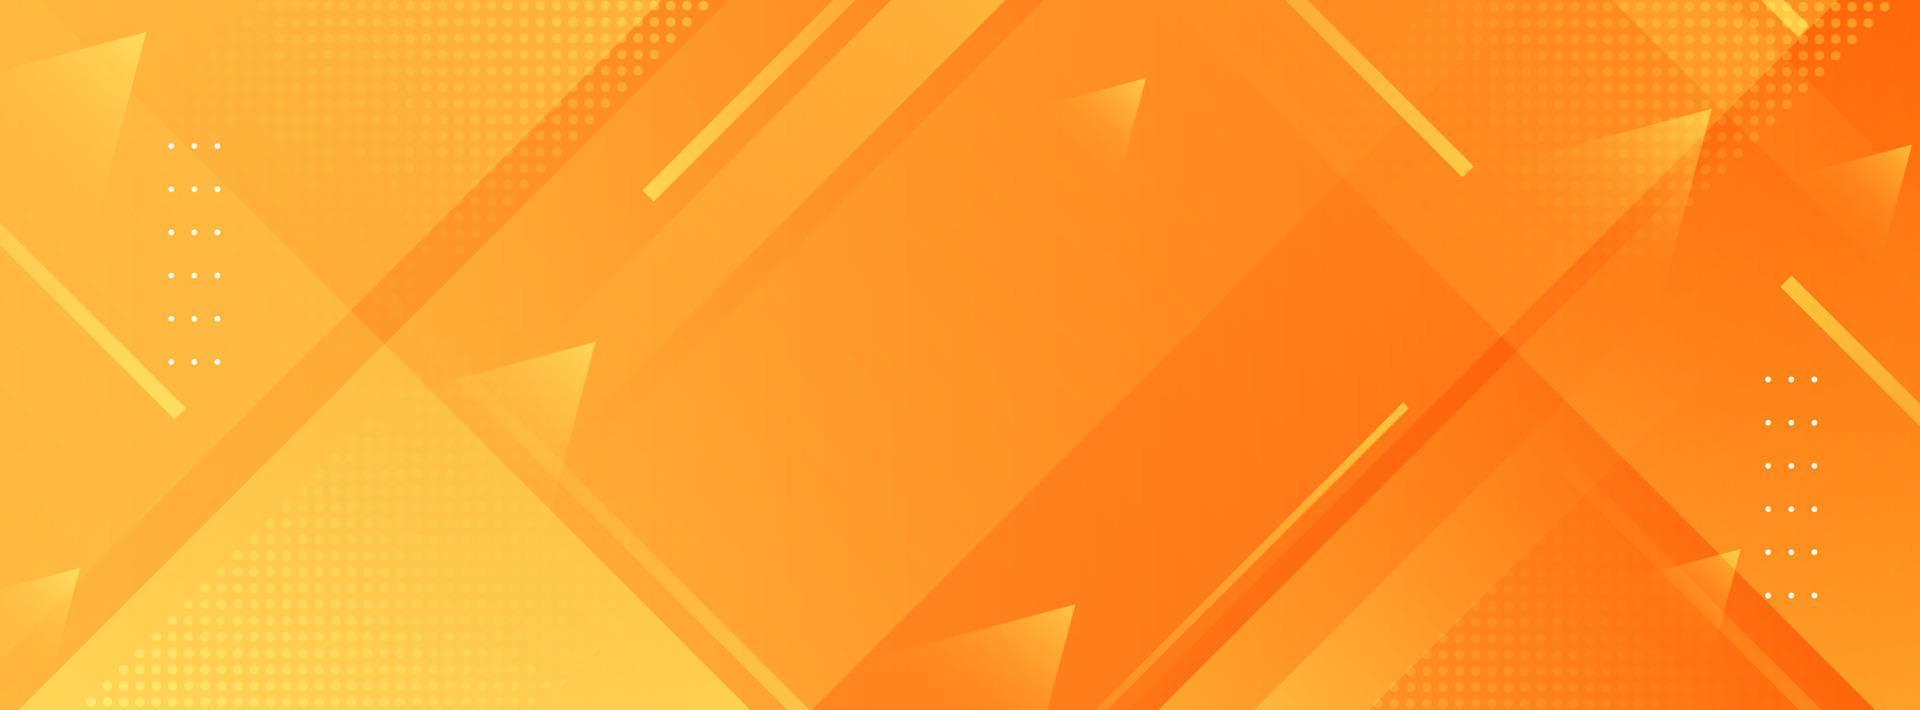 banner background. full color, orange gradation and effect geometry vector